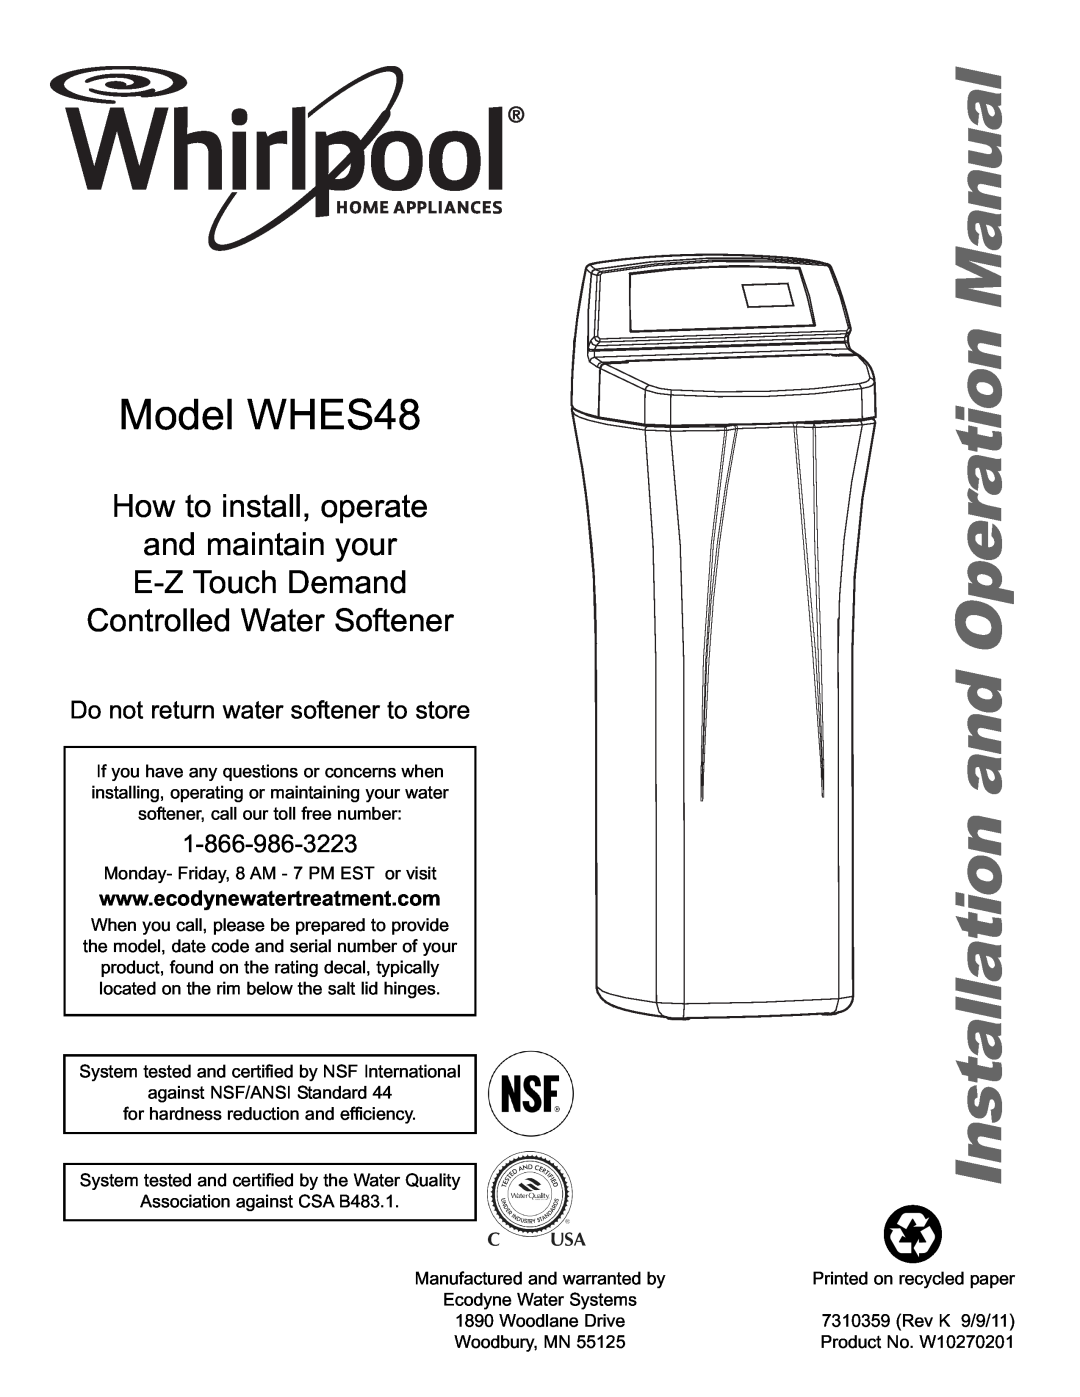 Whirlpool operation manual Model WHES48, How to install, operate, Do not return water softener to store 